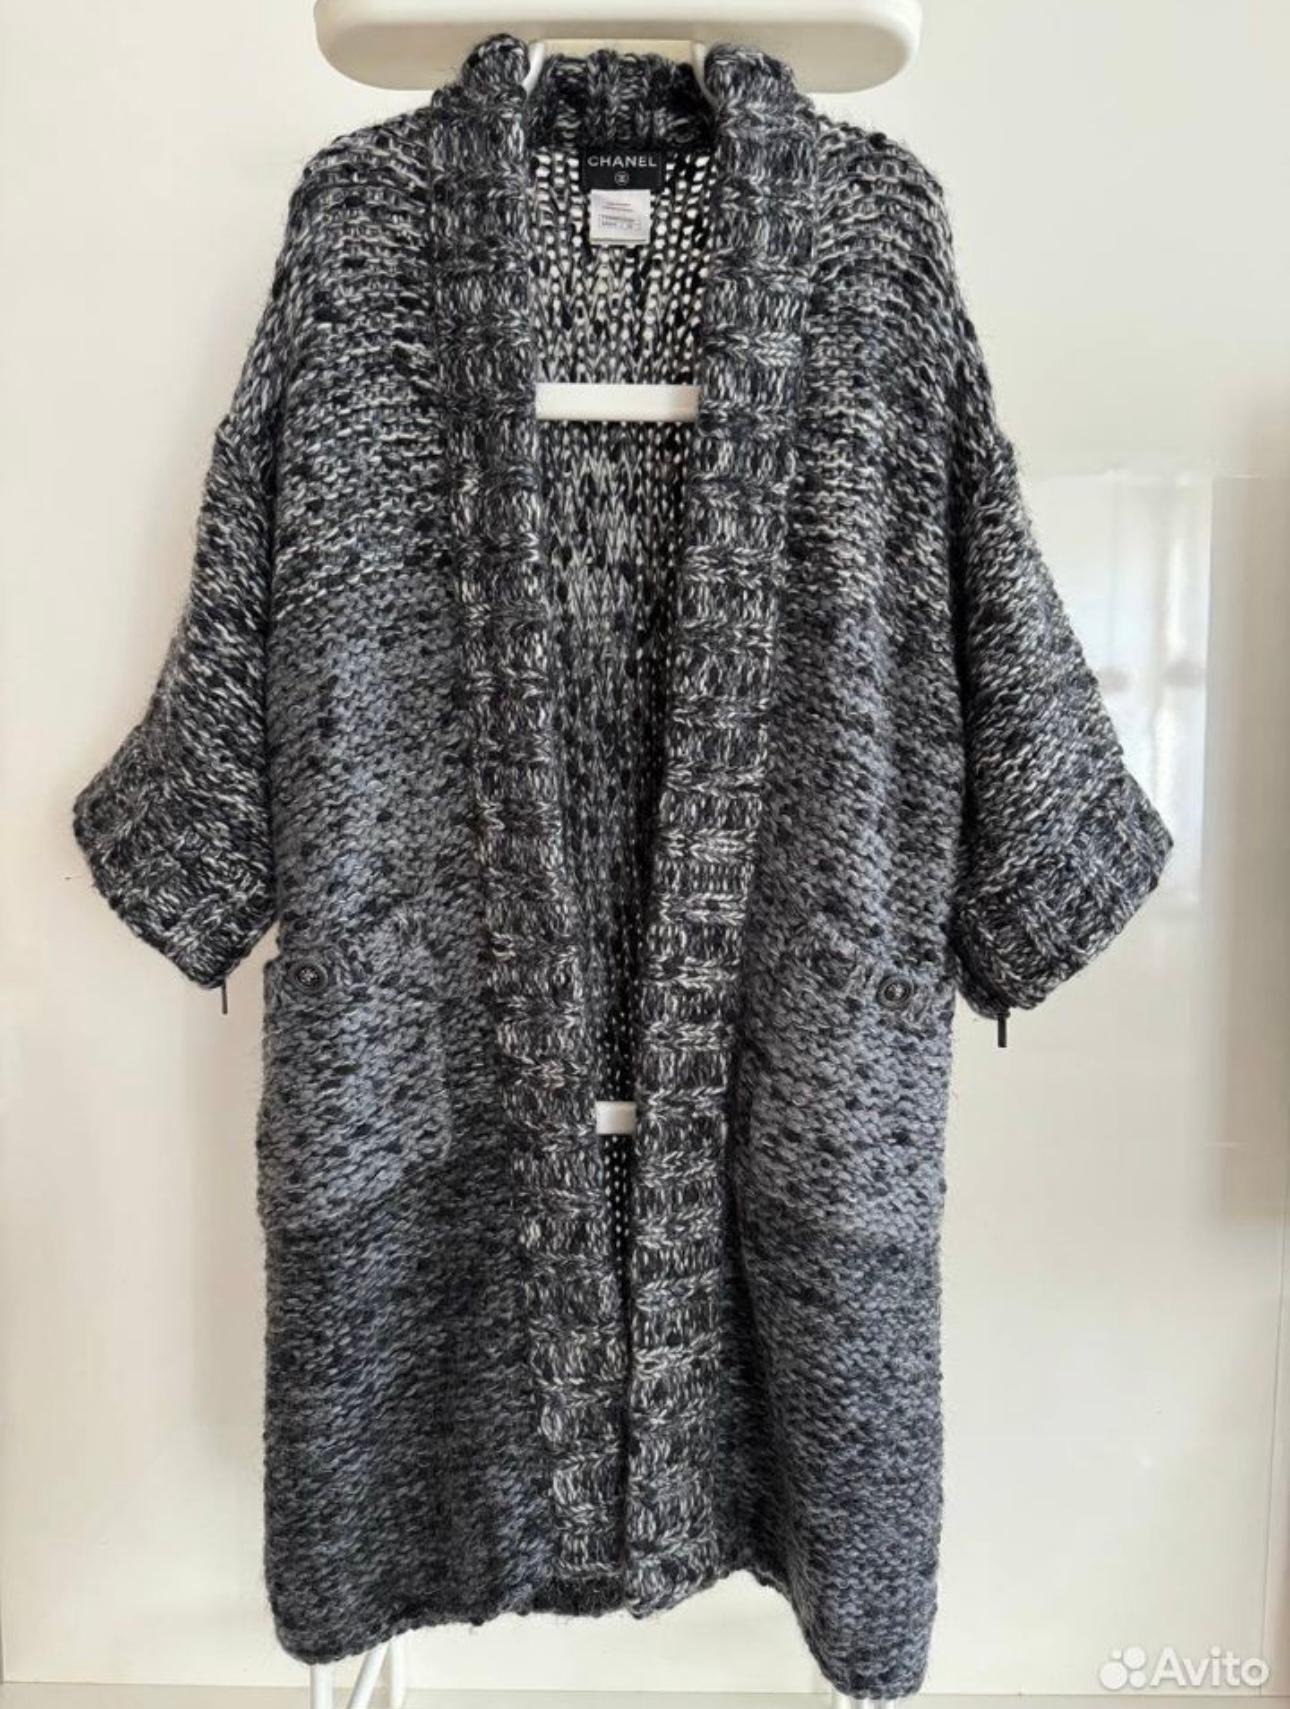 7K$ Steel Gray Relaxed Mohair Coat with CC Buttons In Excellent Condition For Sale In Dubai, AE